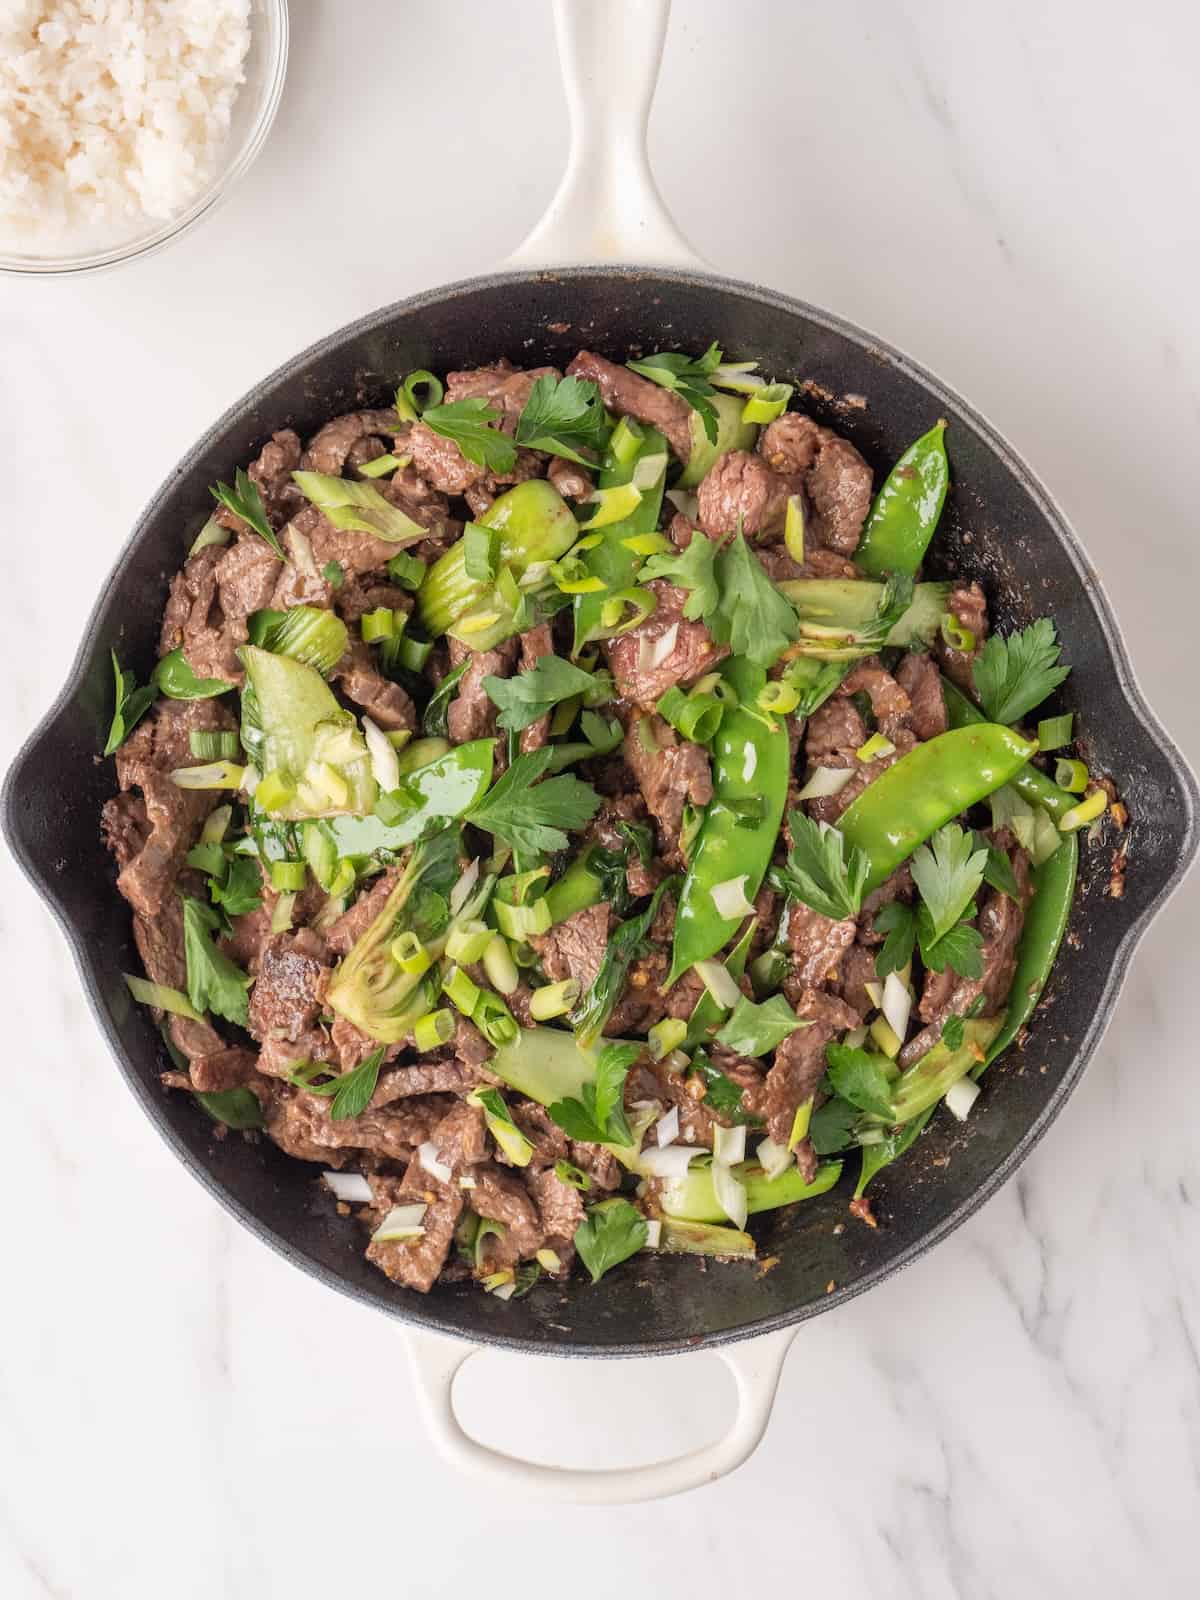 A large skillet with steak stir fry, garnished with parsley and green onion.